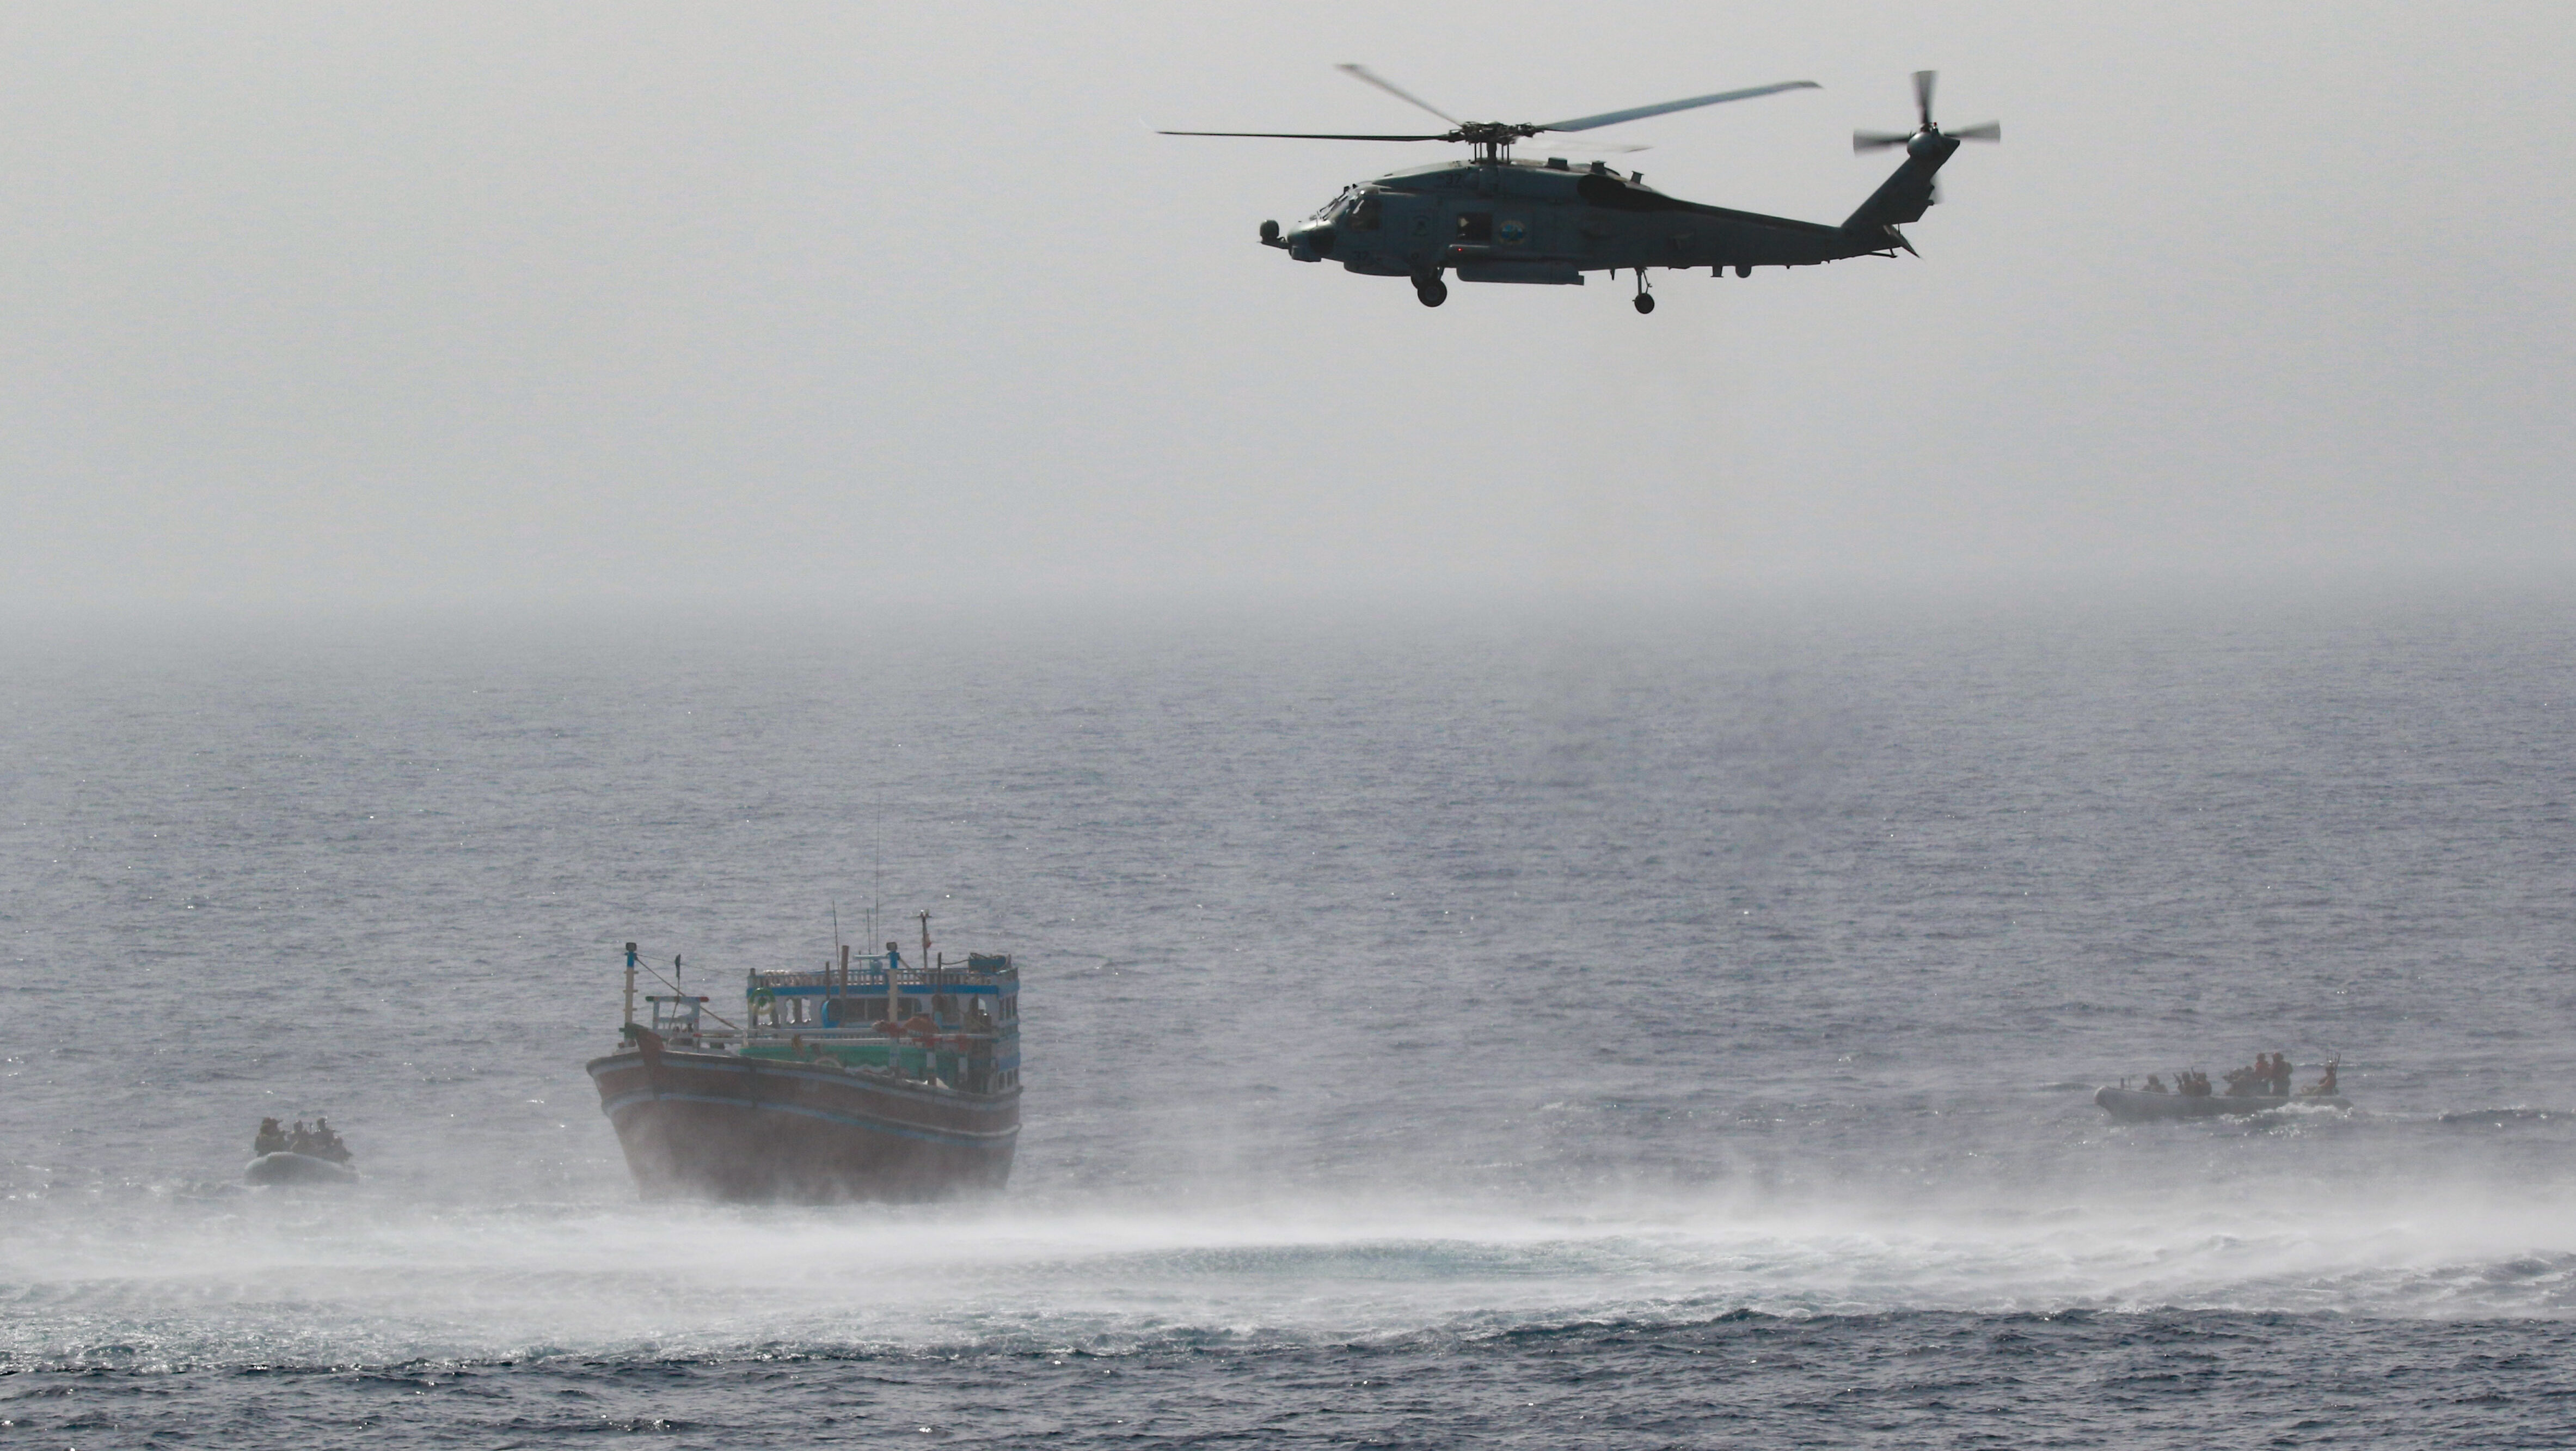 U.S. Officials Claim Two Navy SEALs Missing Near Somalia ‘Fell Into Water’